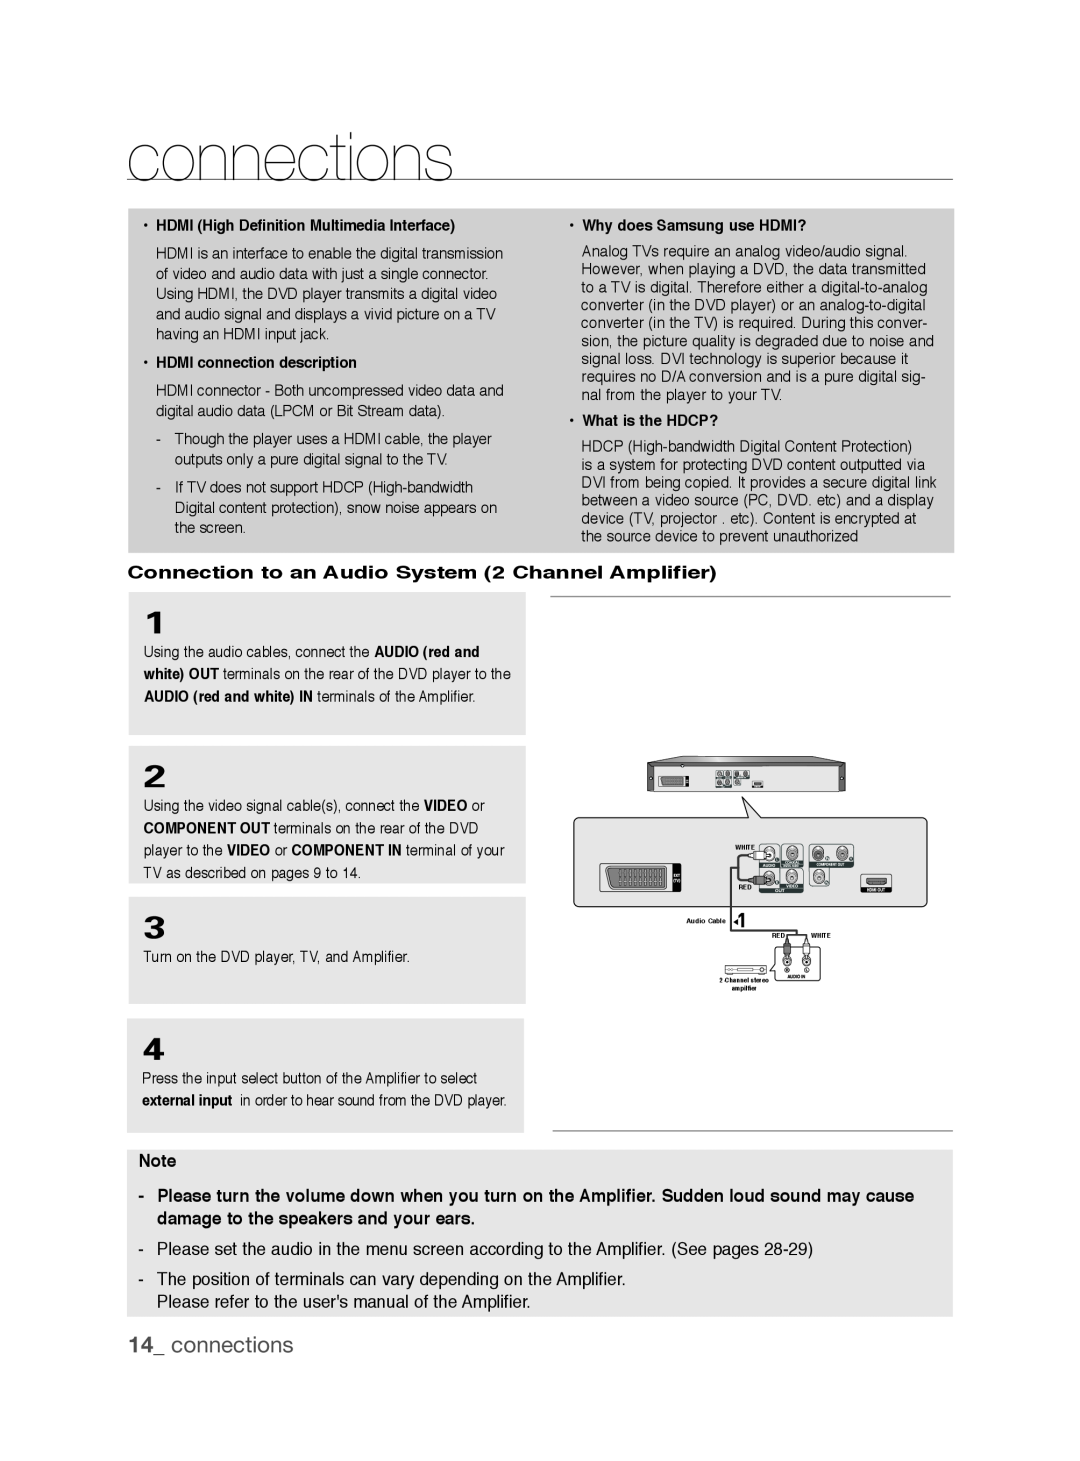 Samsung DVD-1080P9/XEC manual connections, Connection to an Audio System 2 Channel Amplifier, HDMI connection description 